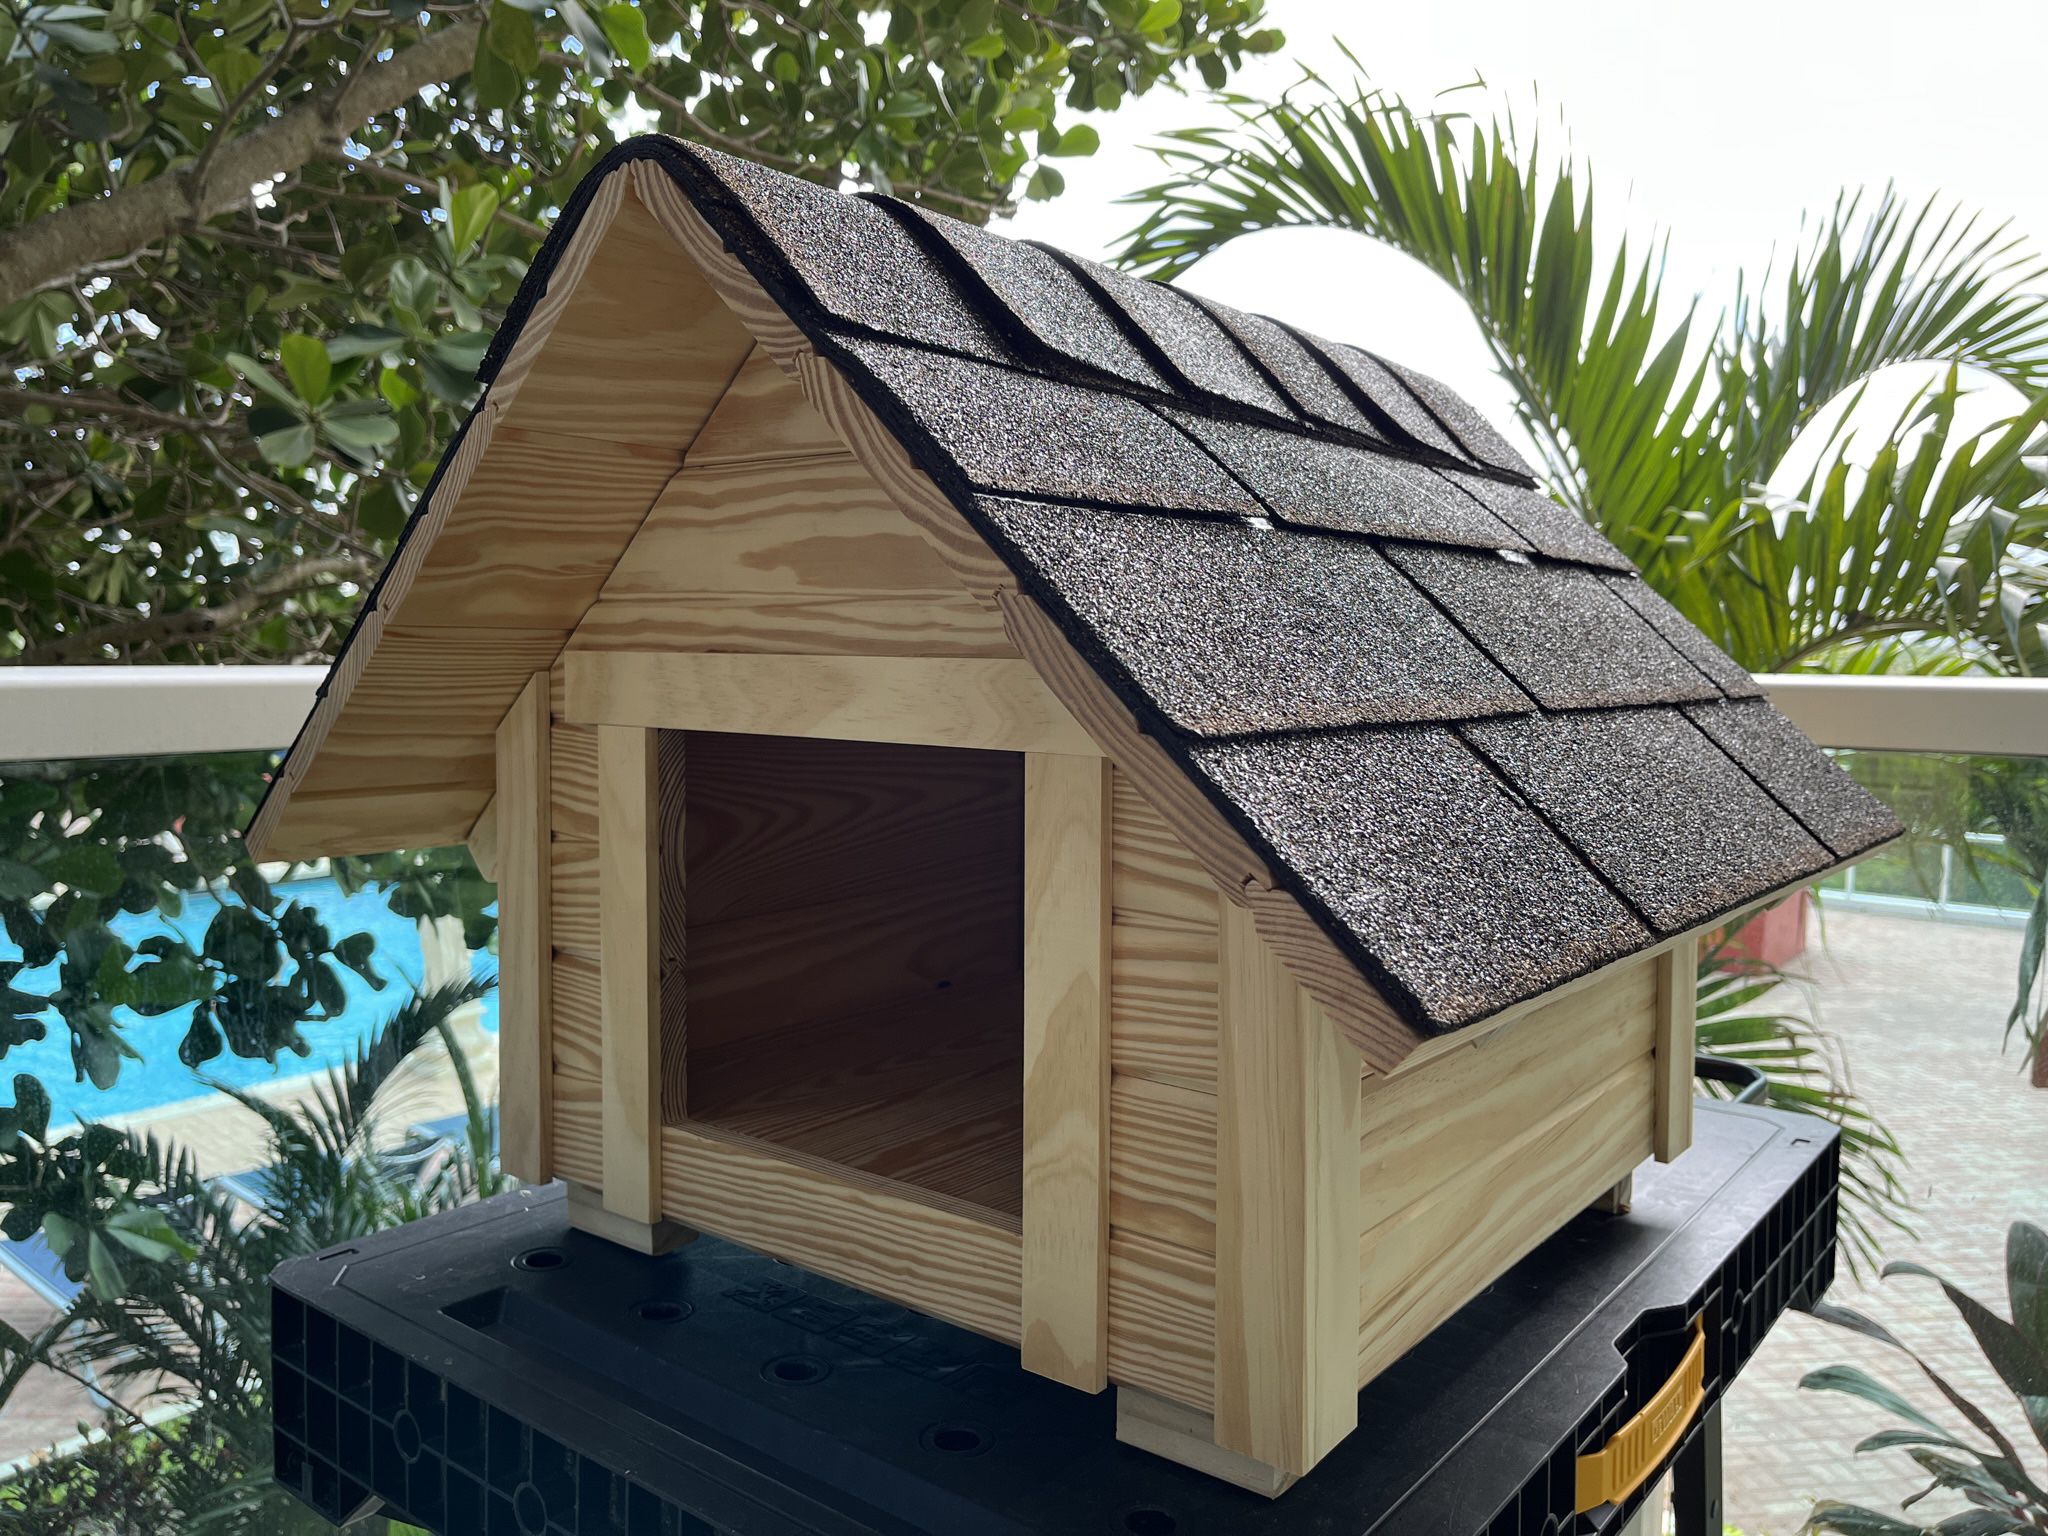 Dog House with Real Roof. Handmade in The USA   Sizes dog house : 20 1/4 * 19 3/4 * 21 inches   Roof: 27 3/4 * 27 1/2 inches   Door: 9 3/4 * 8 1/4 inc